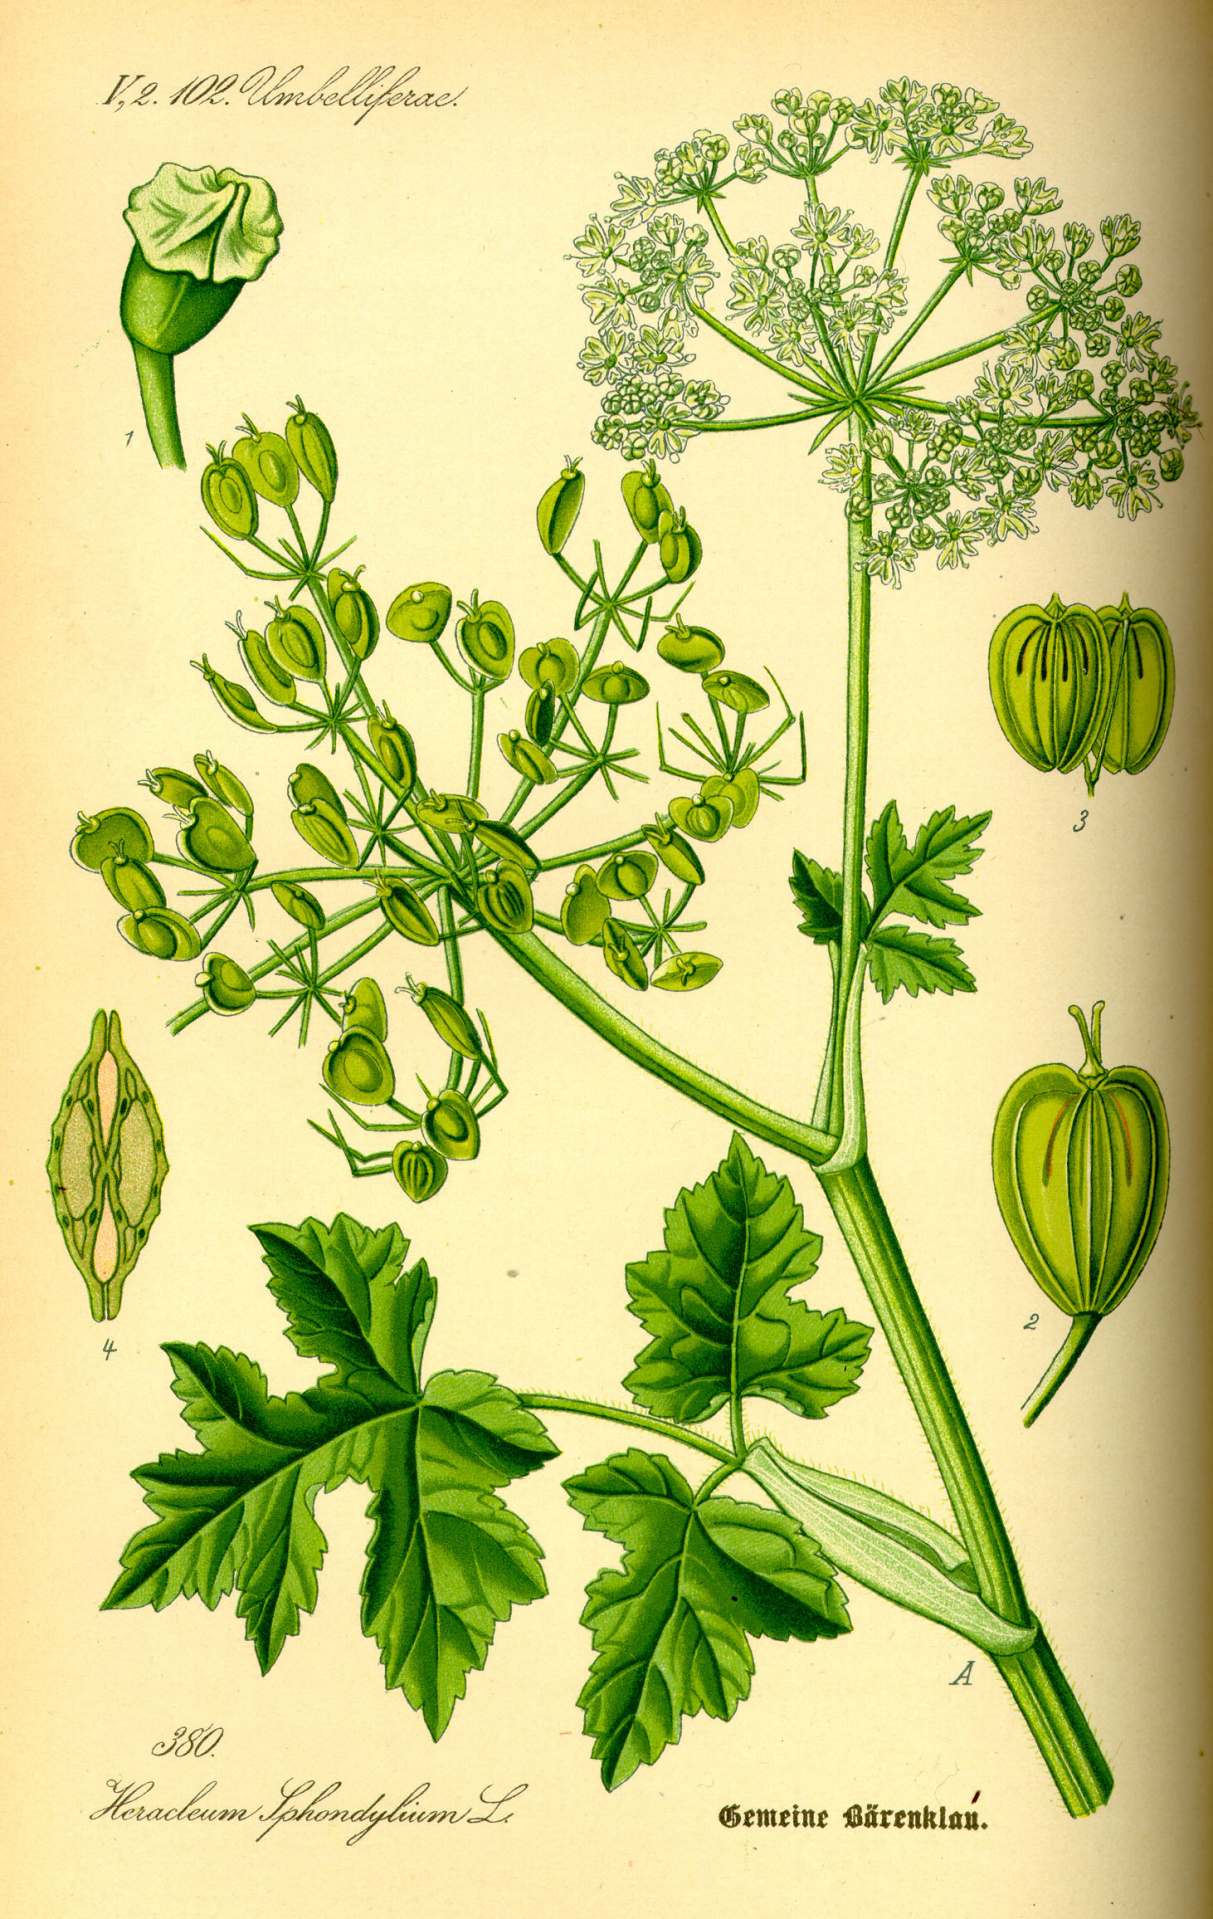 An illustration depicting silphium’s (also known as silphion) heart-shaped seed pods.